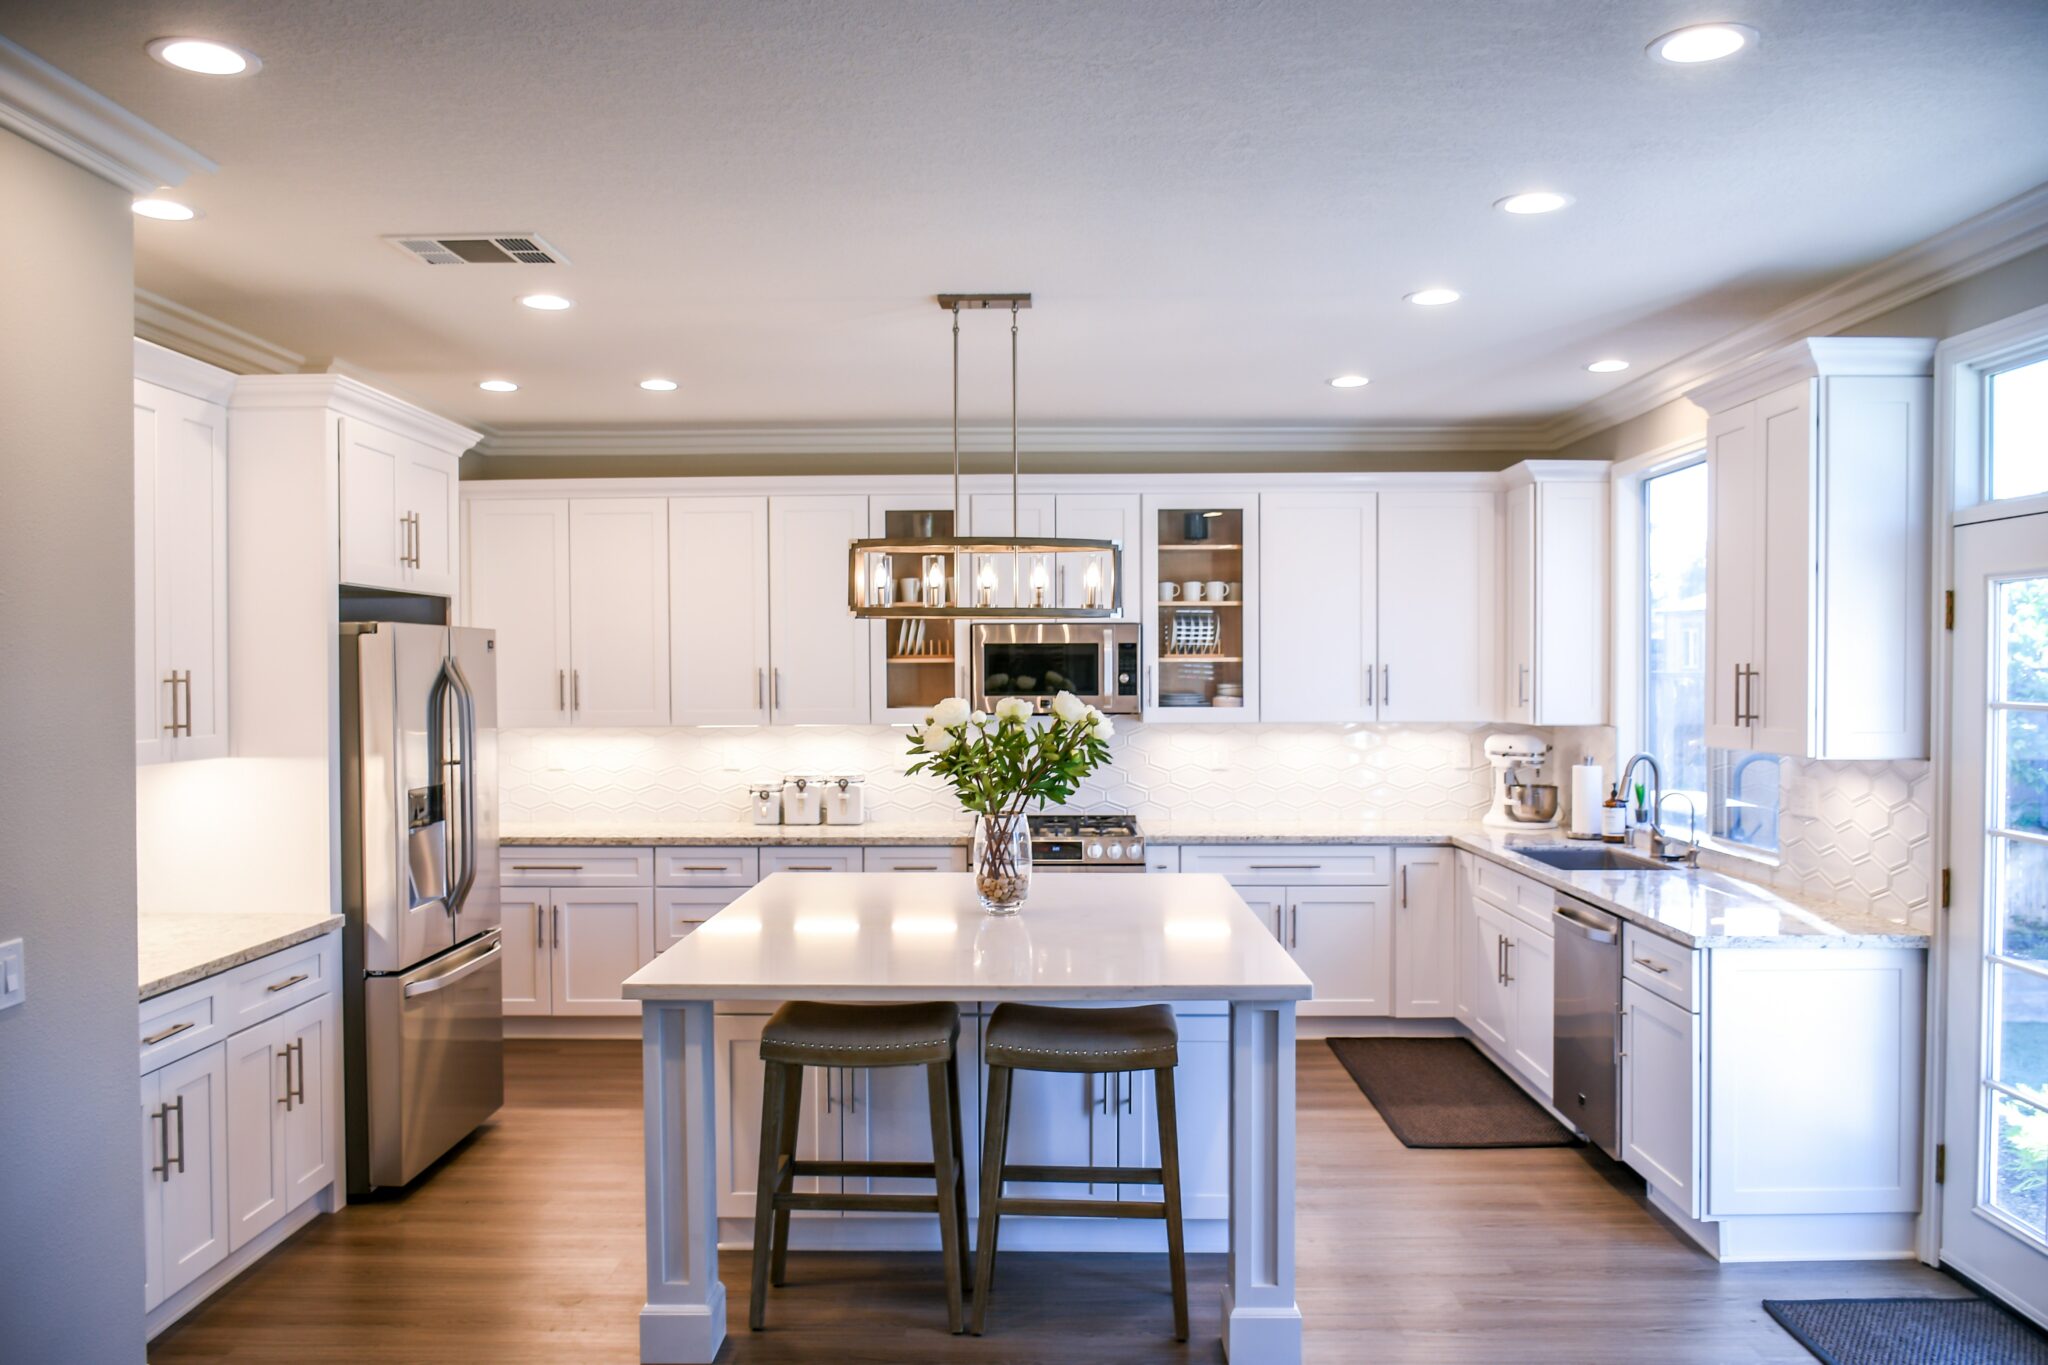 Considerations Before Installing a Kitchen Island with a Sink